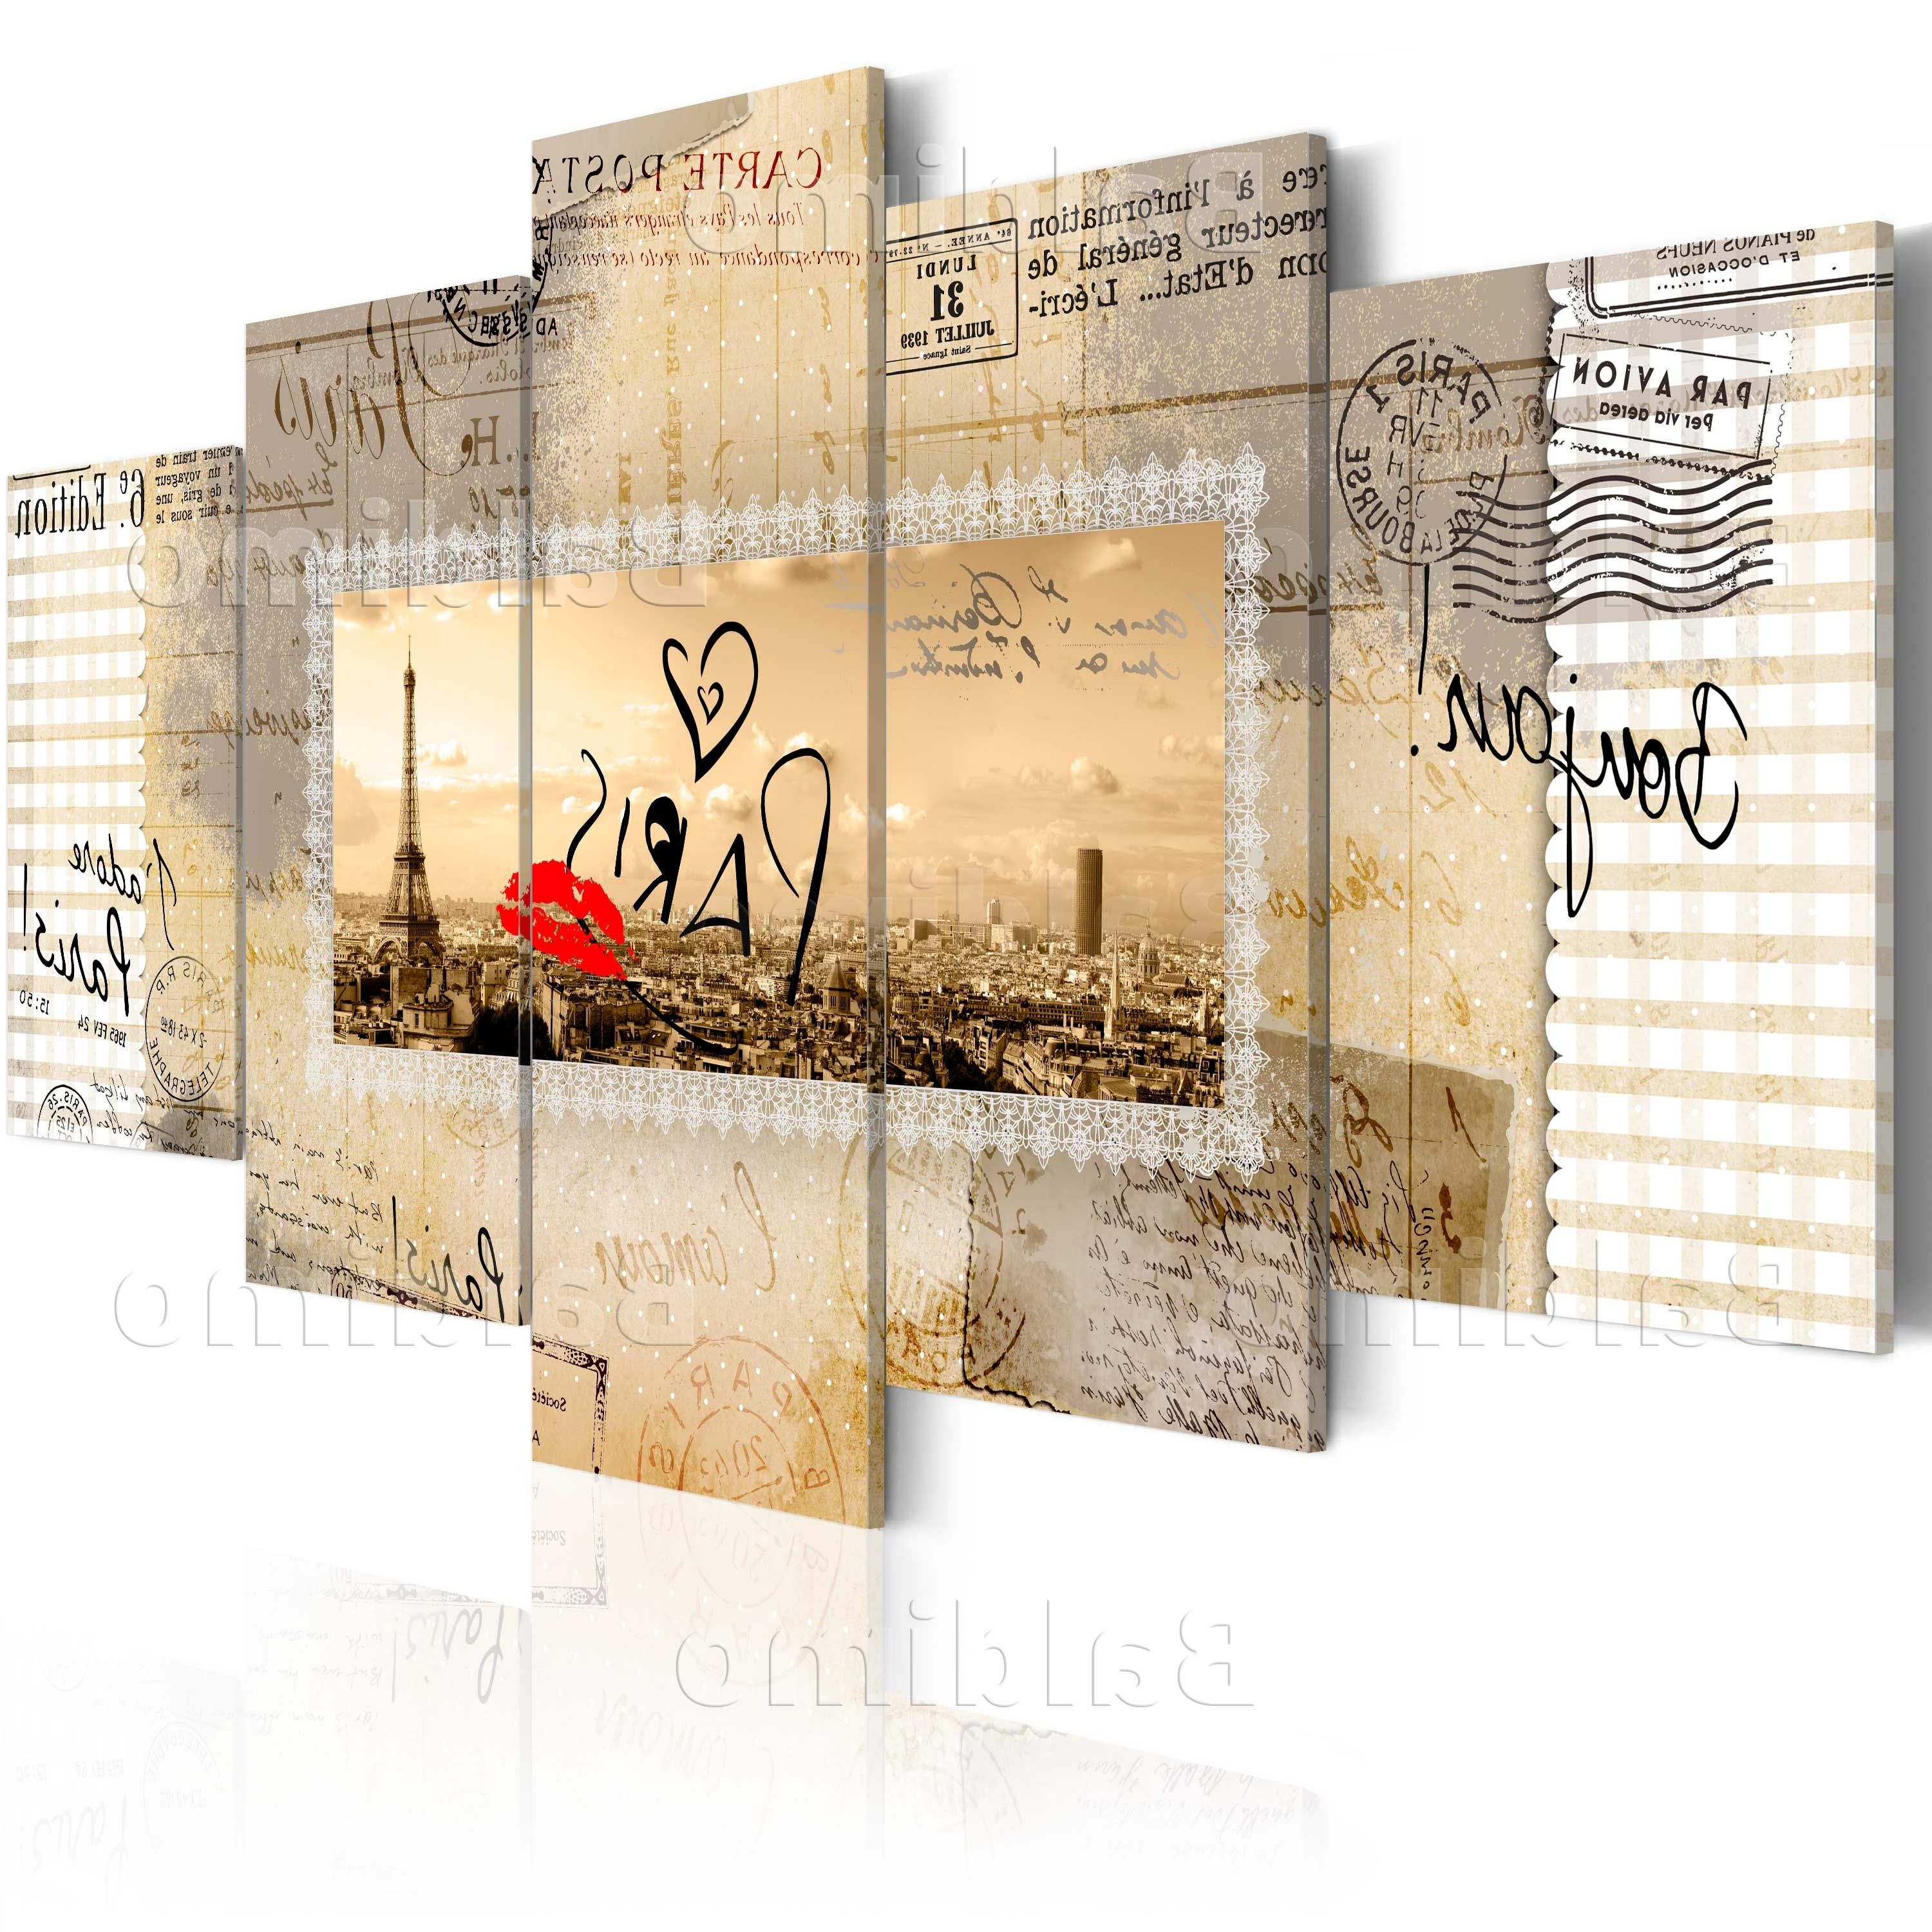 Canvas Wall Art Of Paris Throughout Trendy Large Canvas Wall Art Print + Image + Picture + Photo Paris City (View 1 of 15)